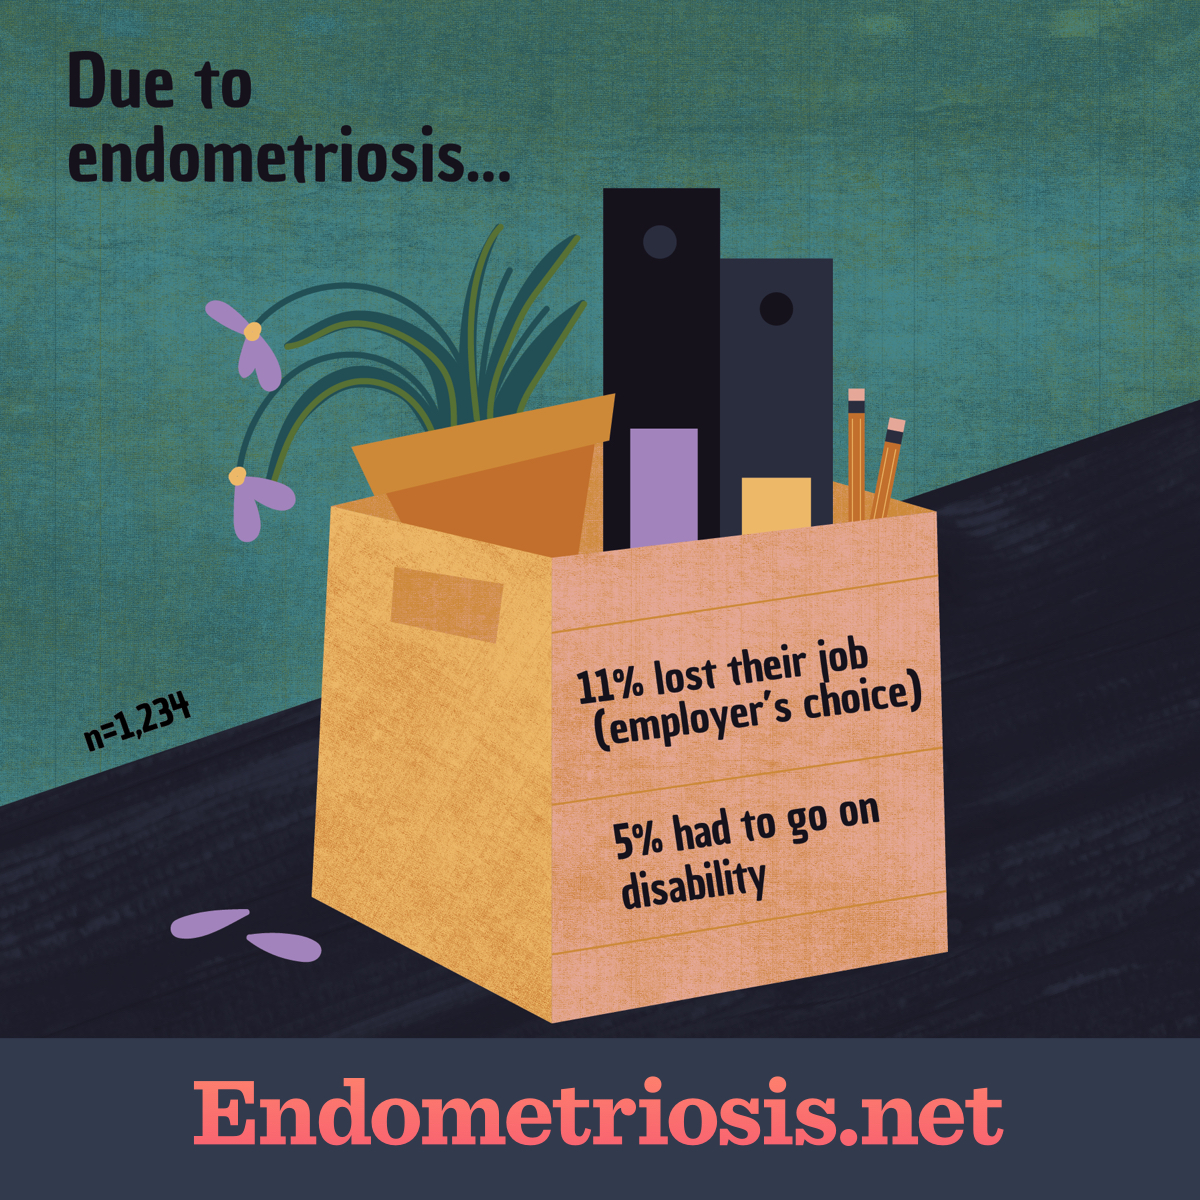 Because of endometriosis, 11% lost their job (employer's choice), 5% had to go on disability